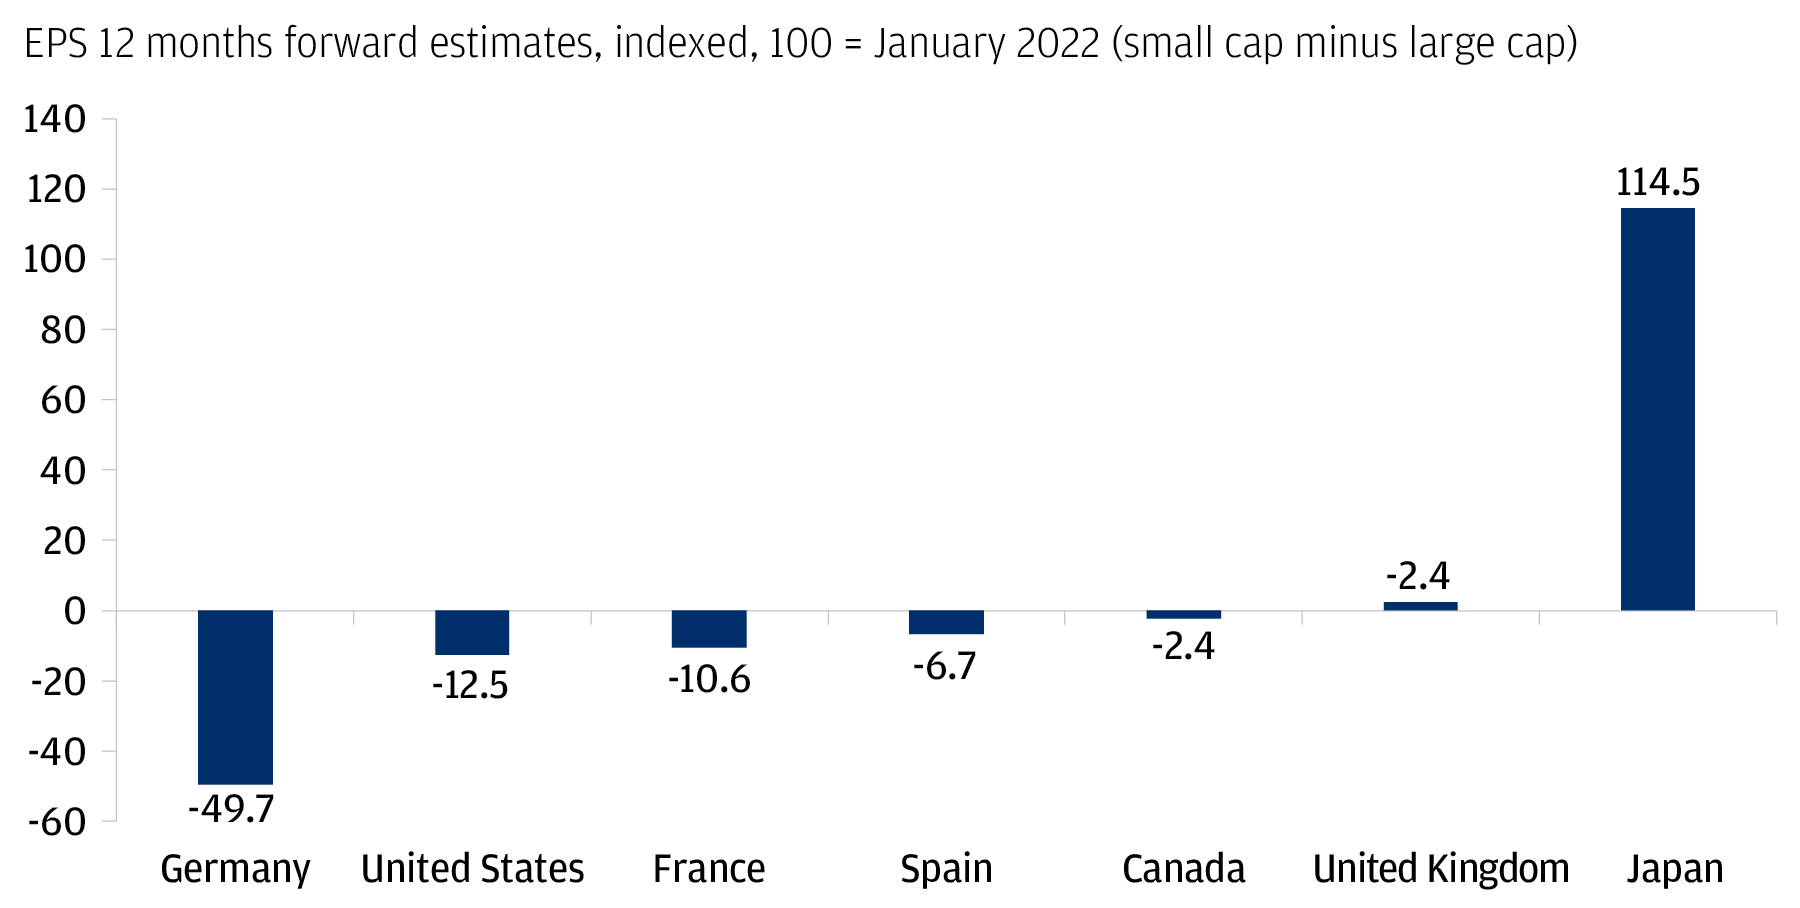 The chart shows EPS 12 months forward estimates indexed at 100 for January 2022 (small cap minus large cap) for seven countries (Germany, U.S., France, Spain, Canada, UK, Japan). 